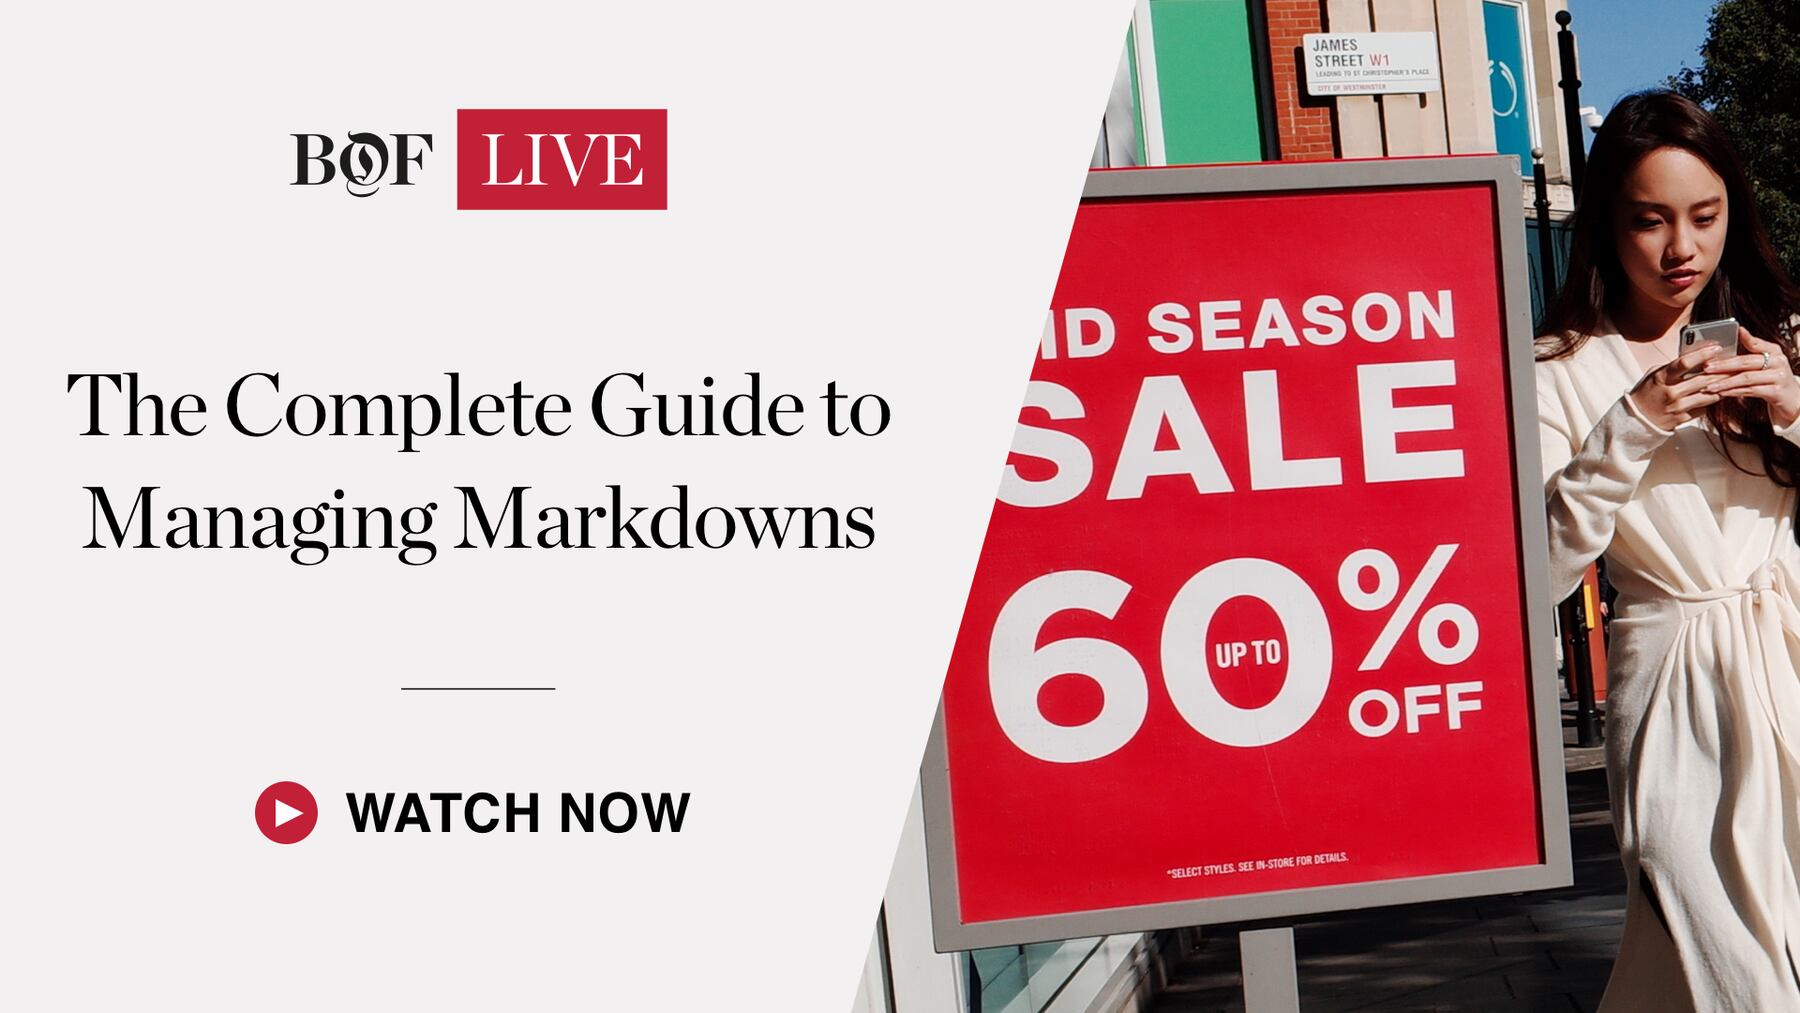 BoF LIVE | The Complete Guide to Managing Markdowns